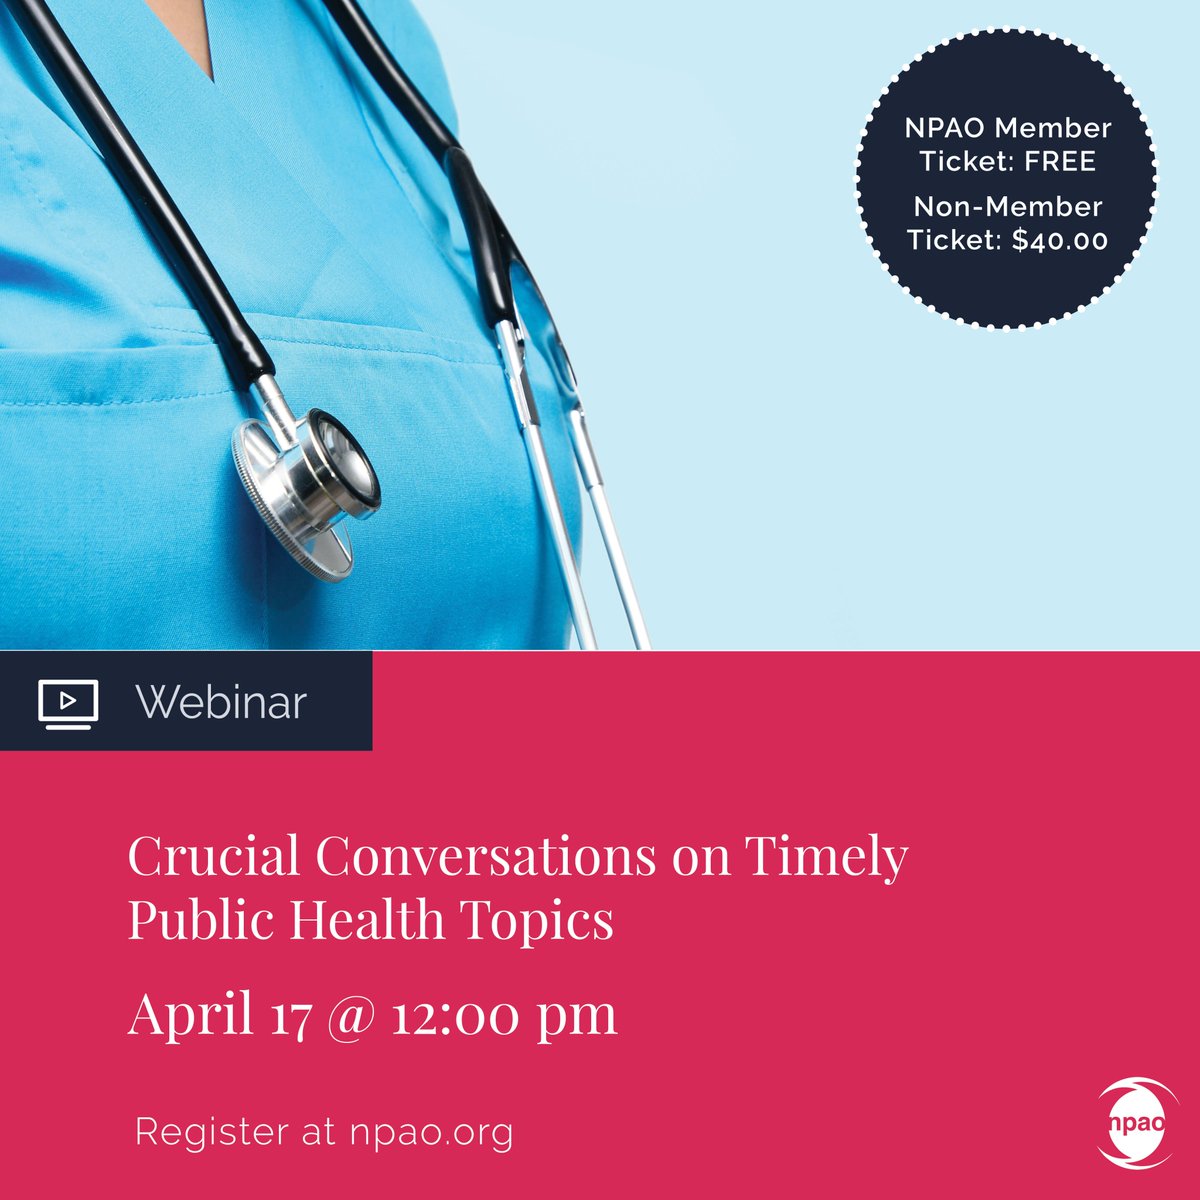 Join our exclusive webinar on Crucial Conversations on Timely Public Health Topics with NPAO & @OntPharmacists on April 17th! Hear insights from healthcare leaders Dr. Warshafsky & Jen Belcher on COVID-19 prevention & therapeutics. Register now: npao.org/calendar-of-ev…